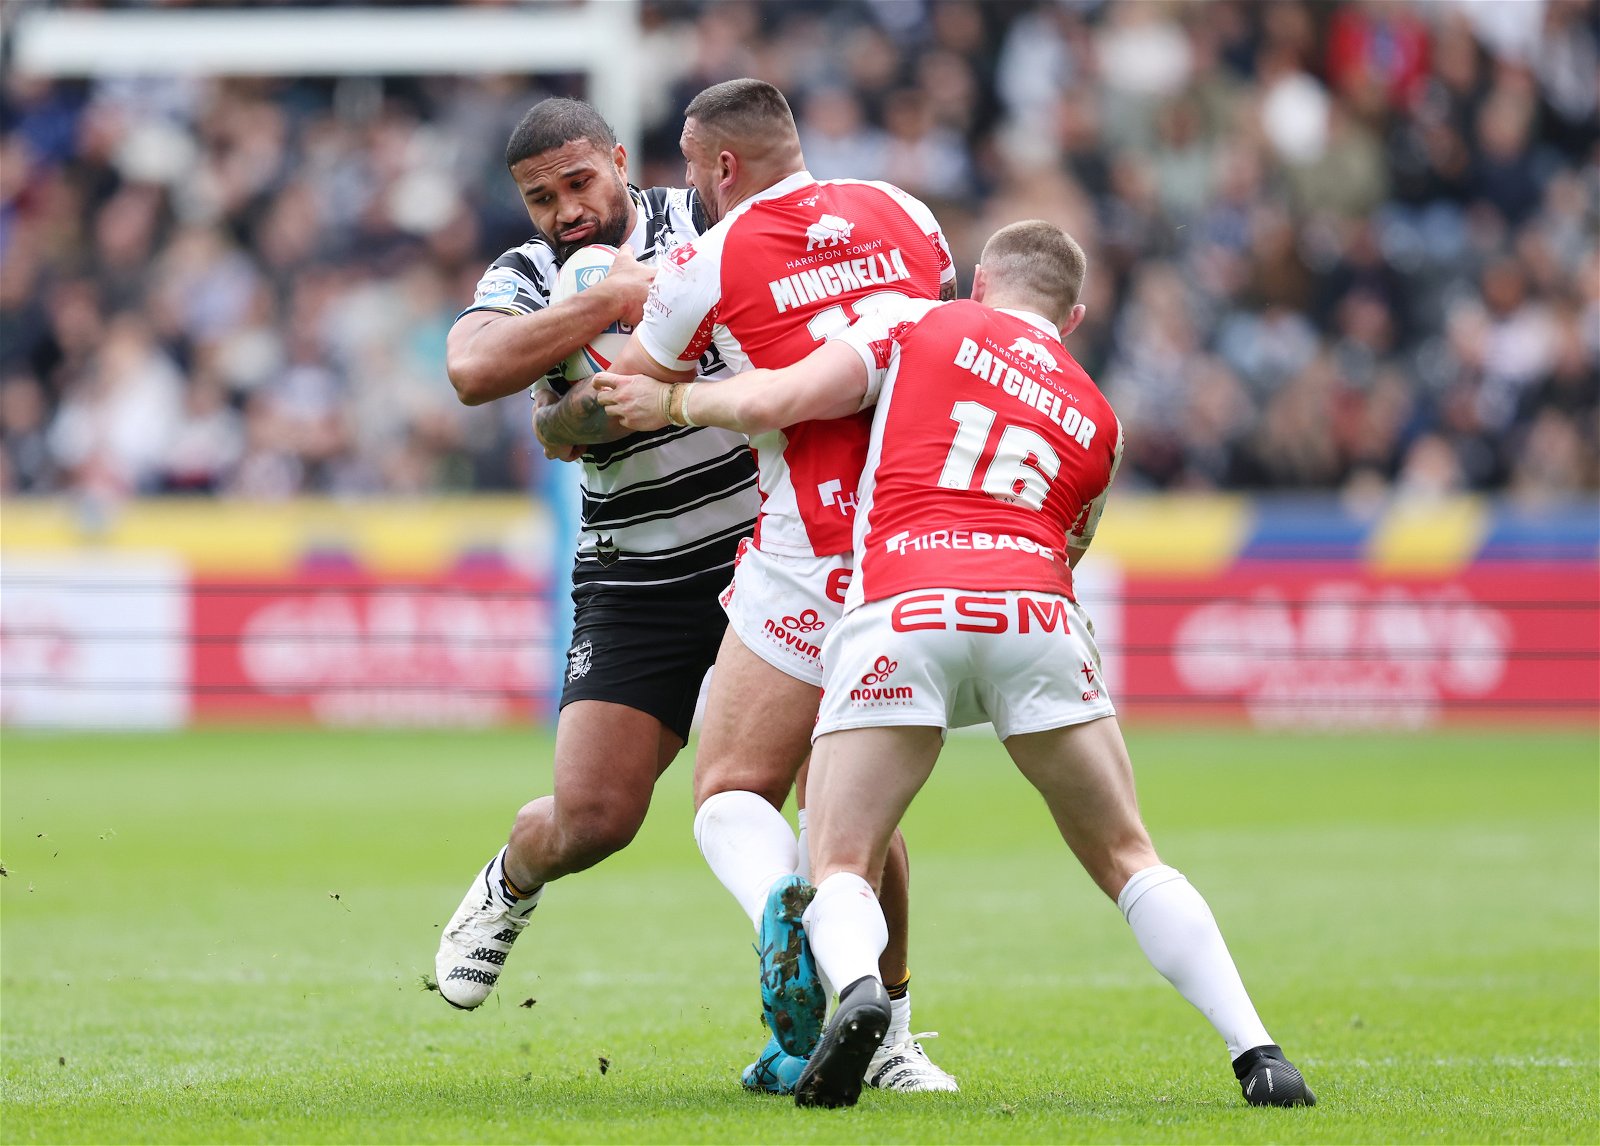 Hull FC's (black and white stripes)Chris Satae is tackled by Hull Kingston Rovers' (red) Elliot Minchella and James Batchelor